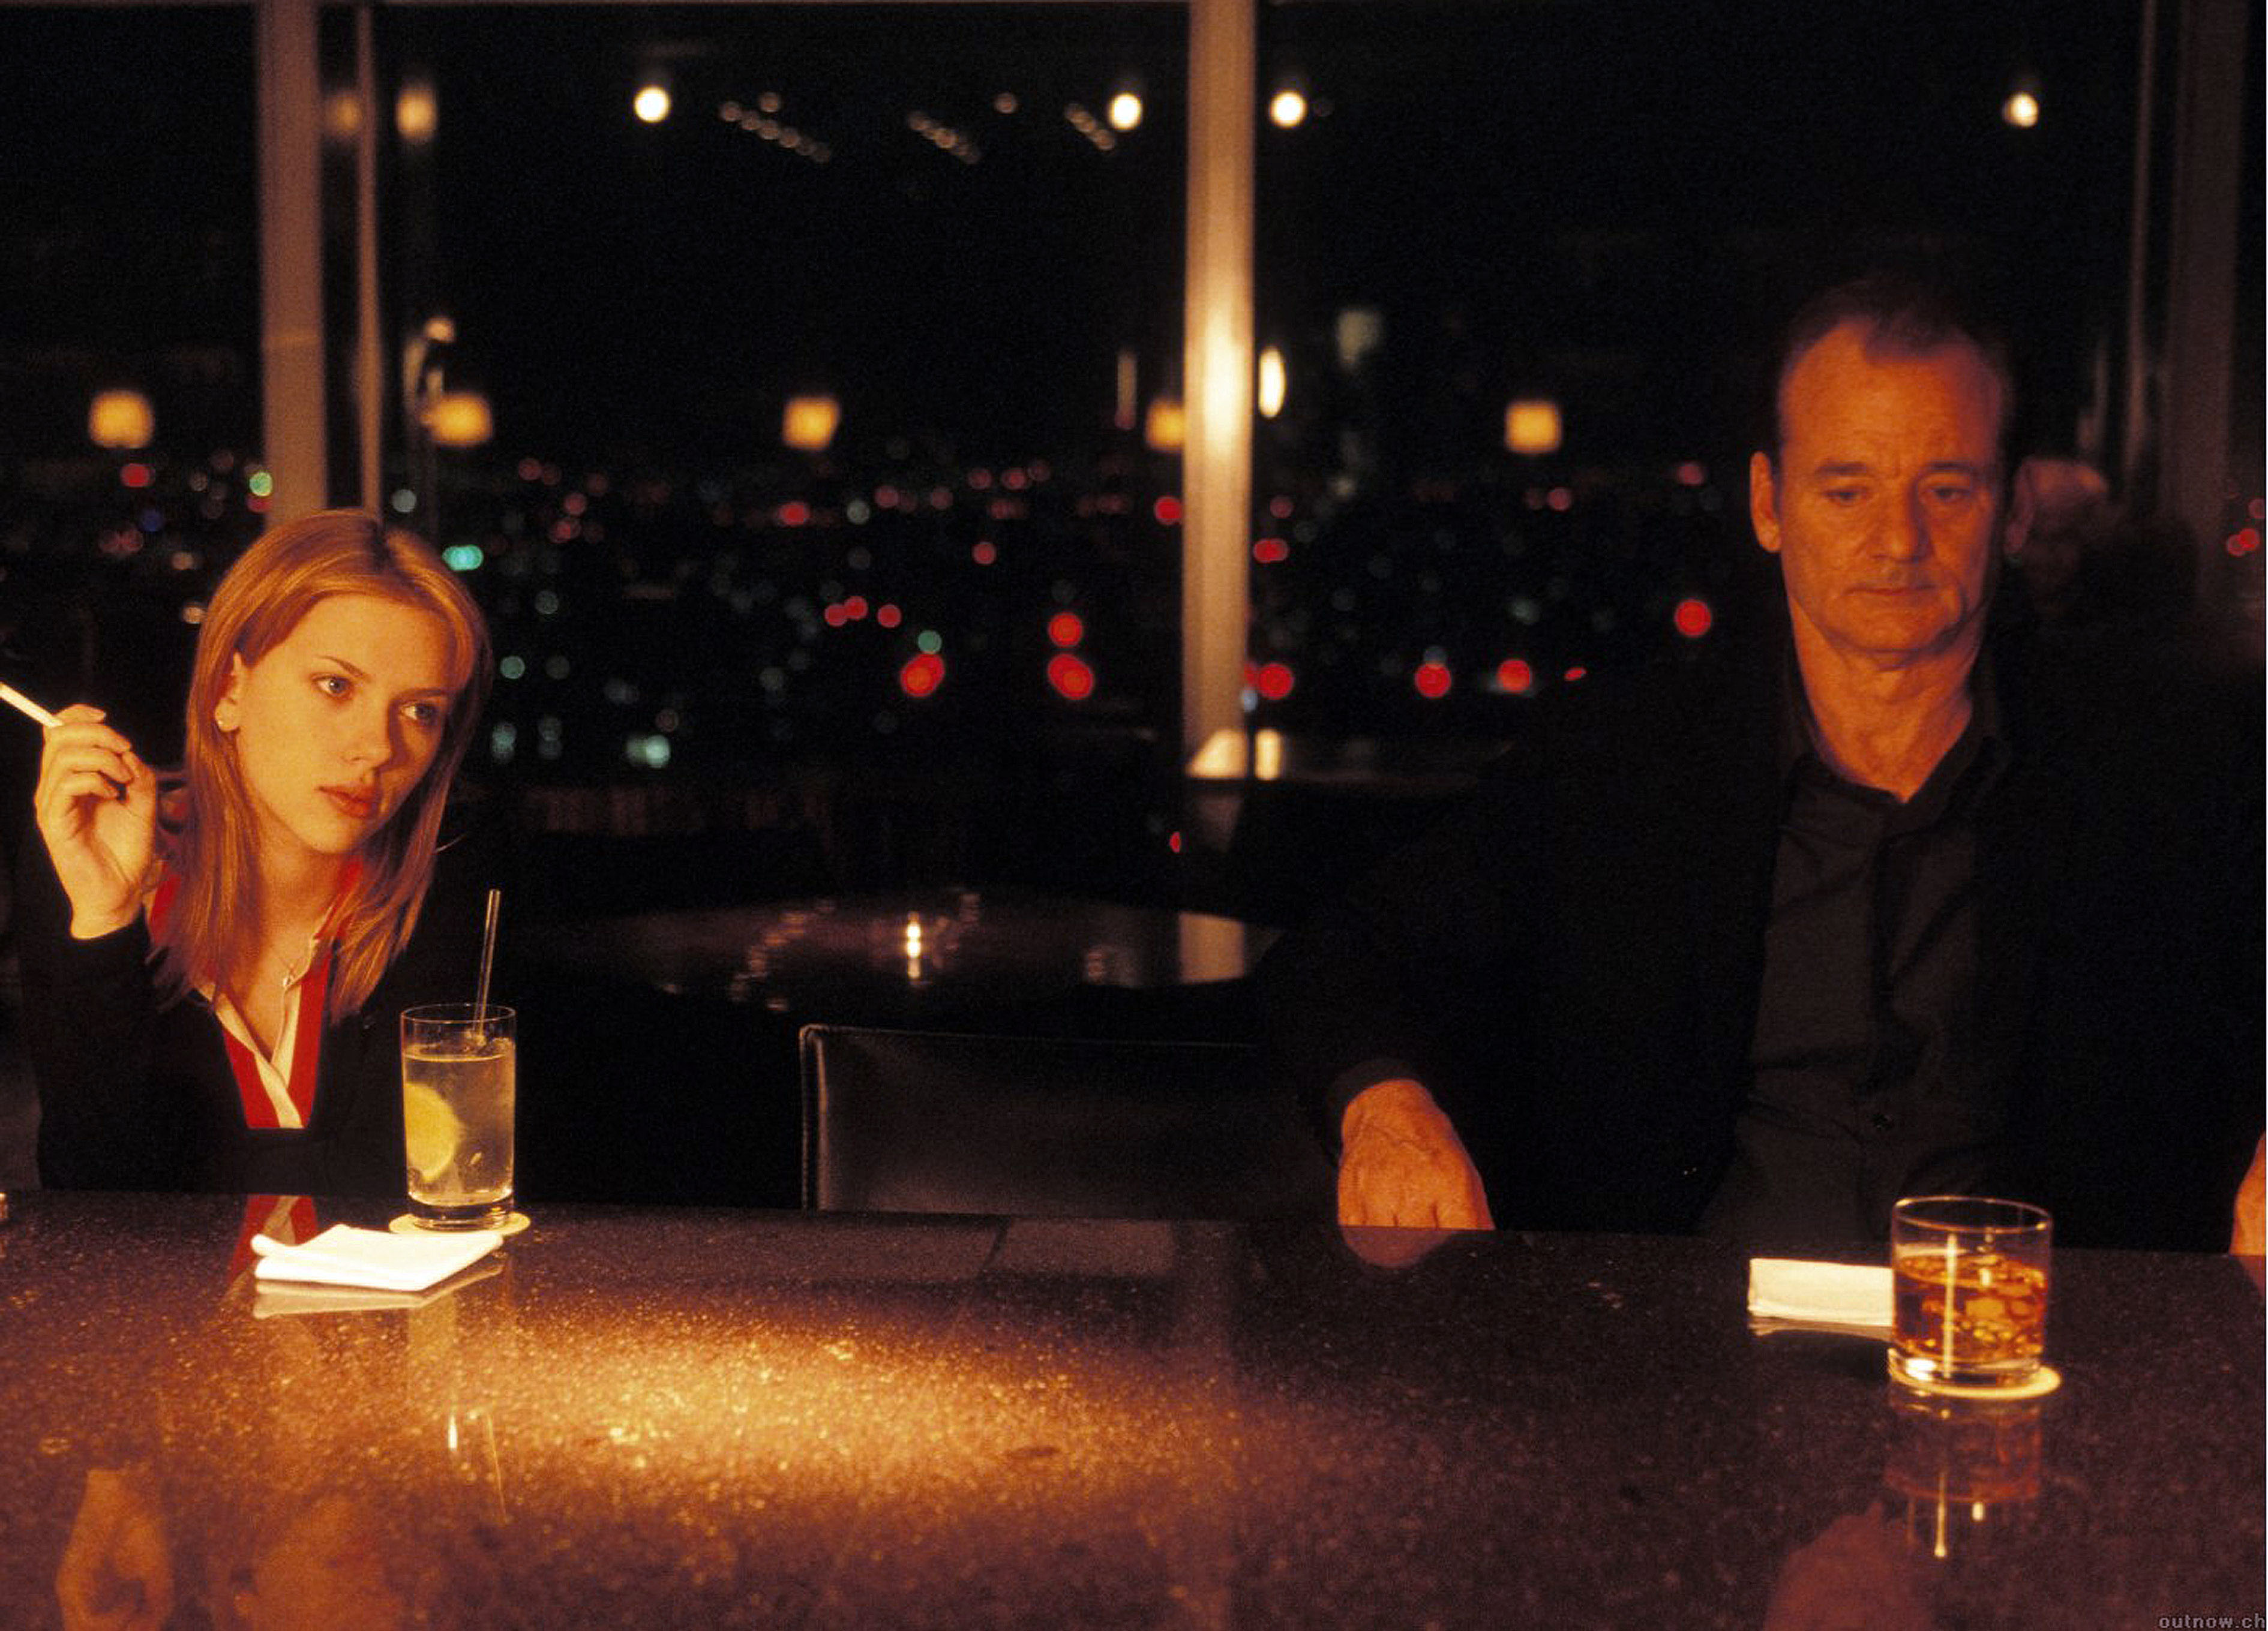 (L to R) Scarlett Johansson as Charlotte and Bill Murray as Bob Harris, at a bar in Lost in Translation